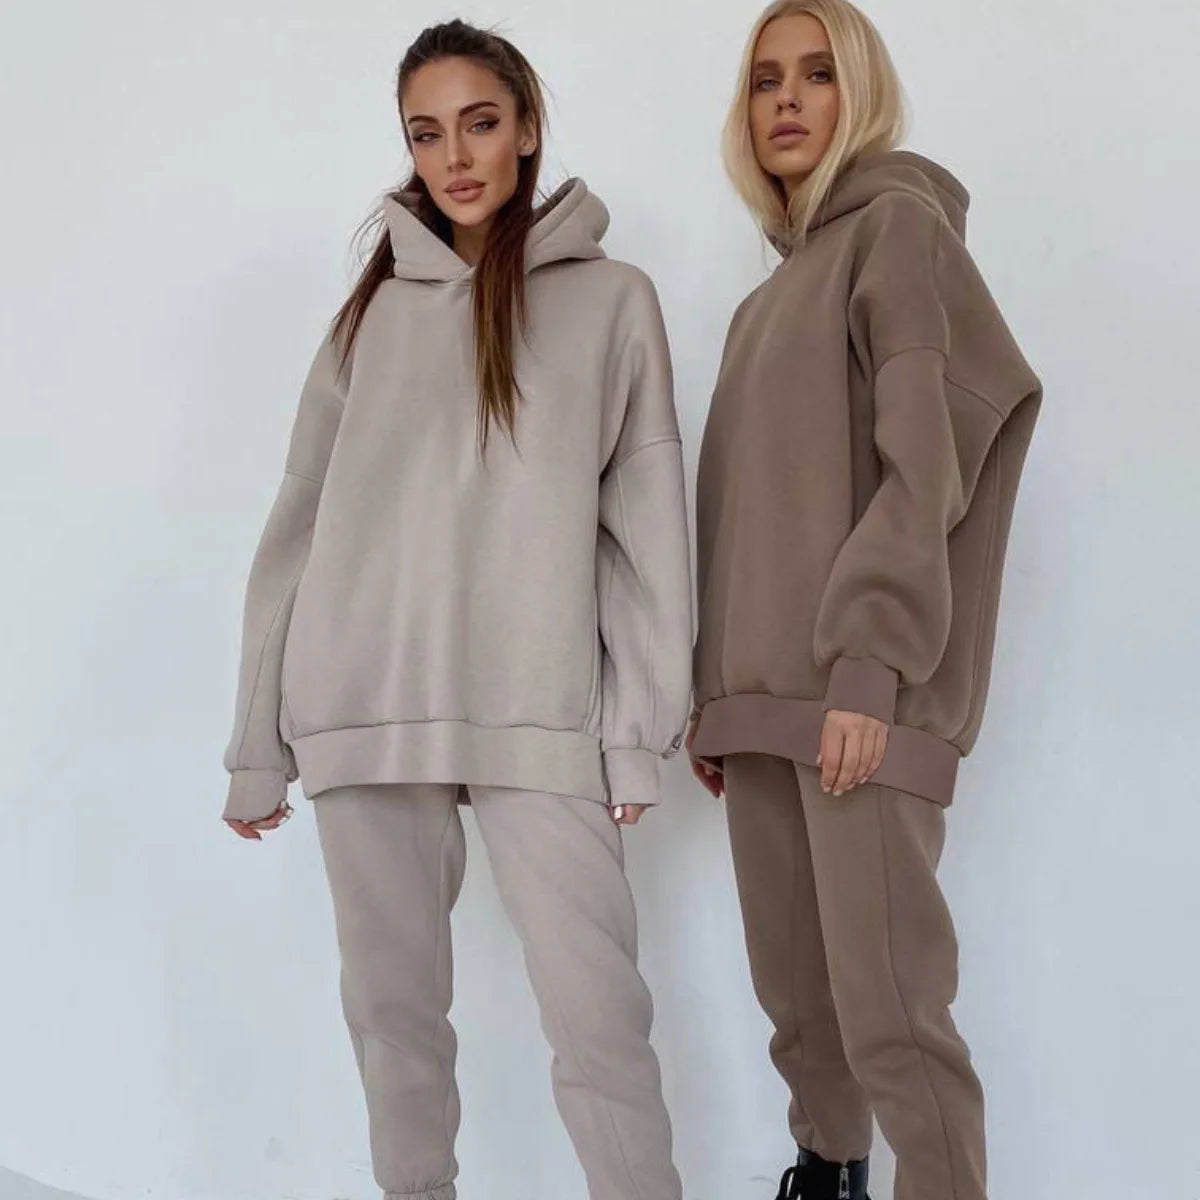 Women's Hoodie Pullover and Sweatpants Set – Trend Setters LLC